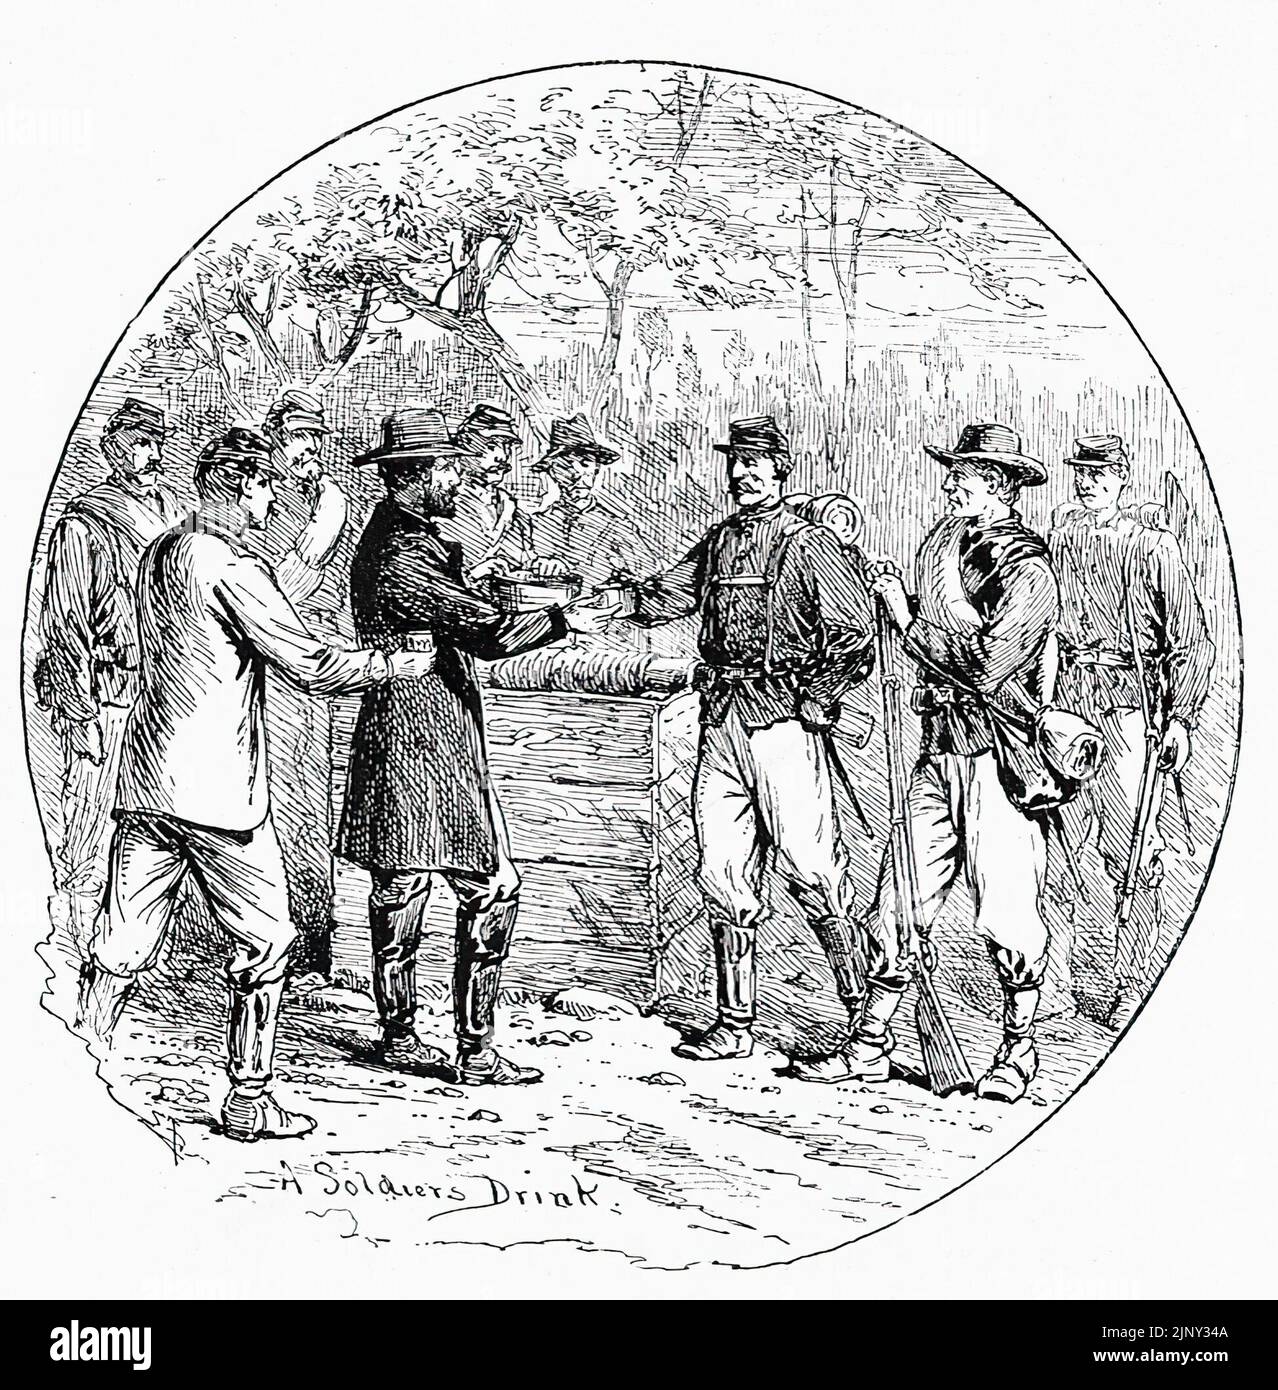 A Soldiers Drink. Union Army soldier drink from a roadside farmhouse well. 19th century American Civil War illustration by Edwin Forbes Stock Photo